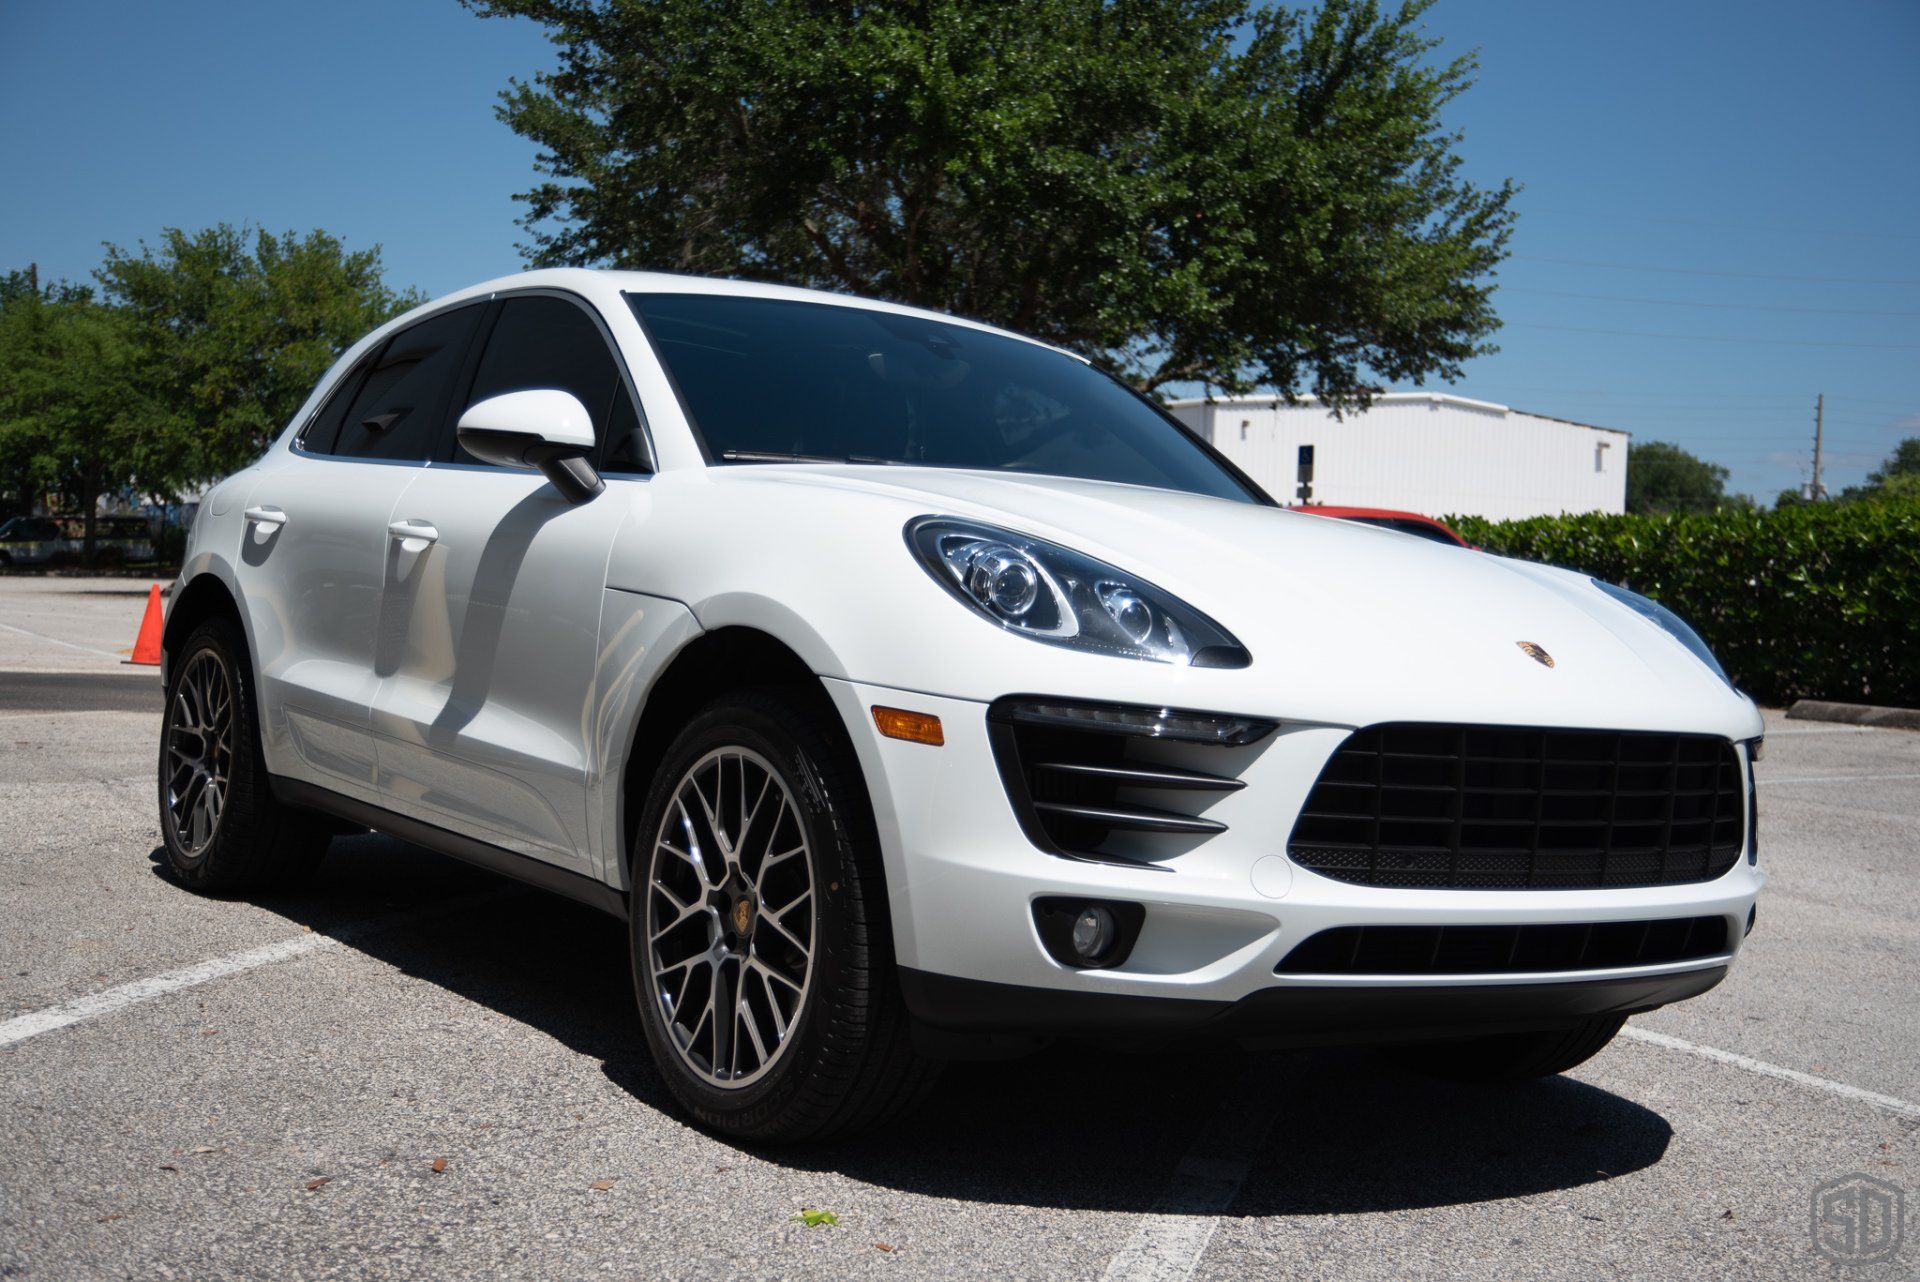 2019 Porsche Macan Modesta BC-05 Advanced Water Repellent Coating and Modesta BC-06 Heat Resistant for wheels and calipers Orlando Florida